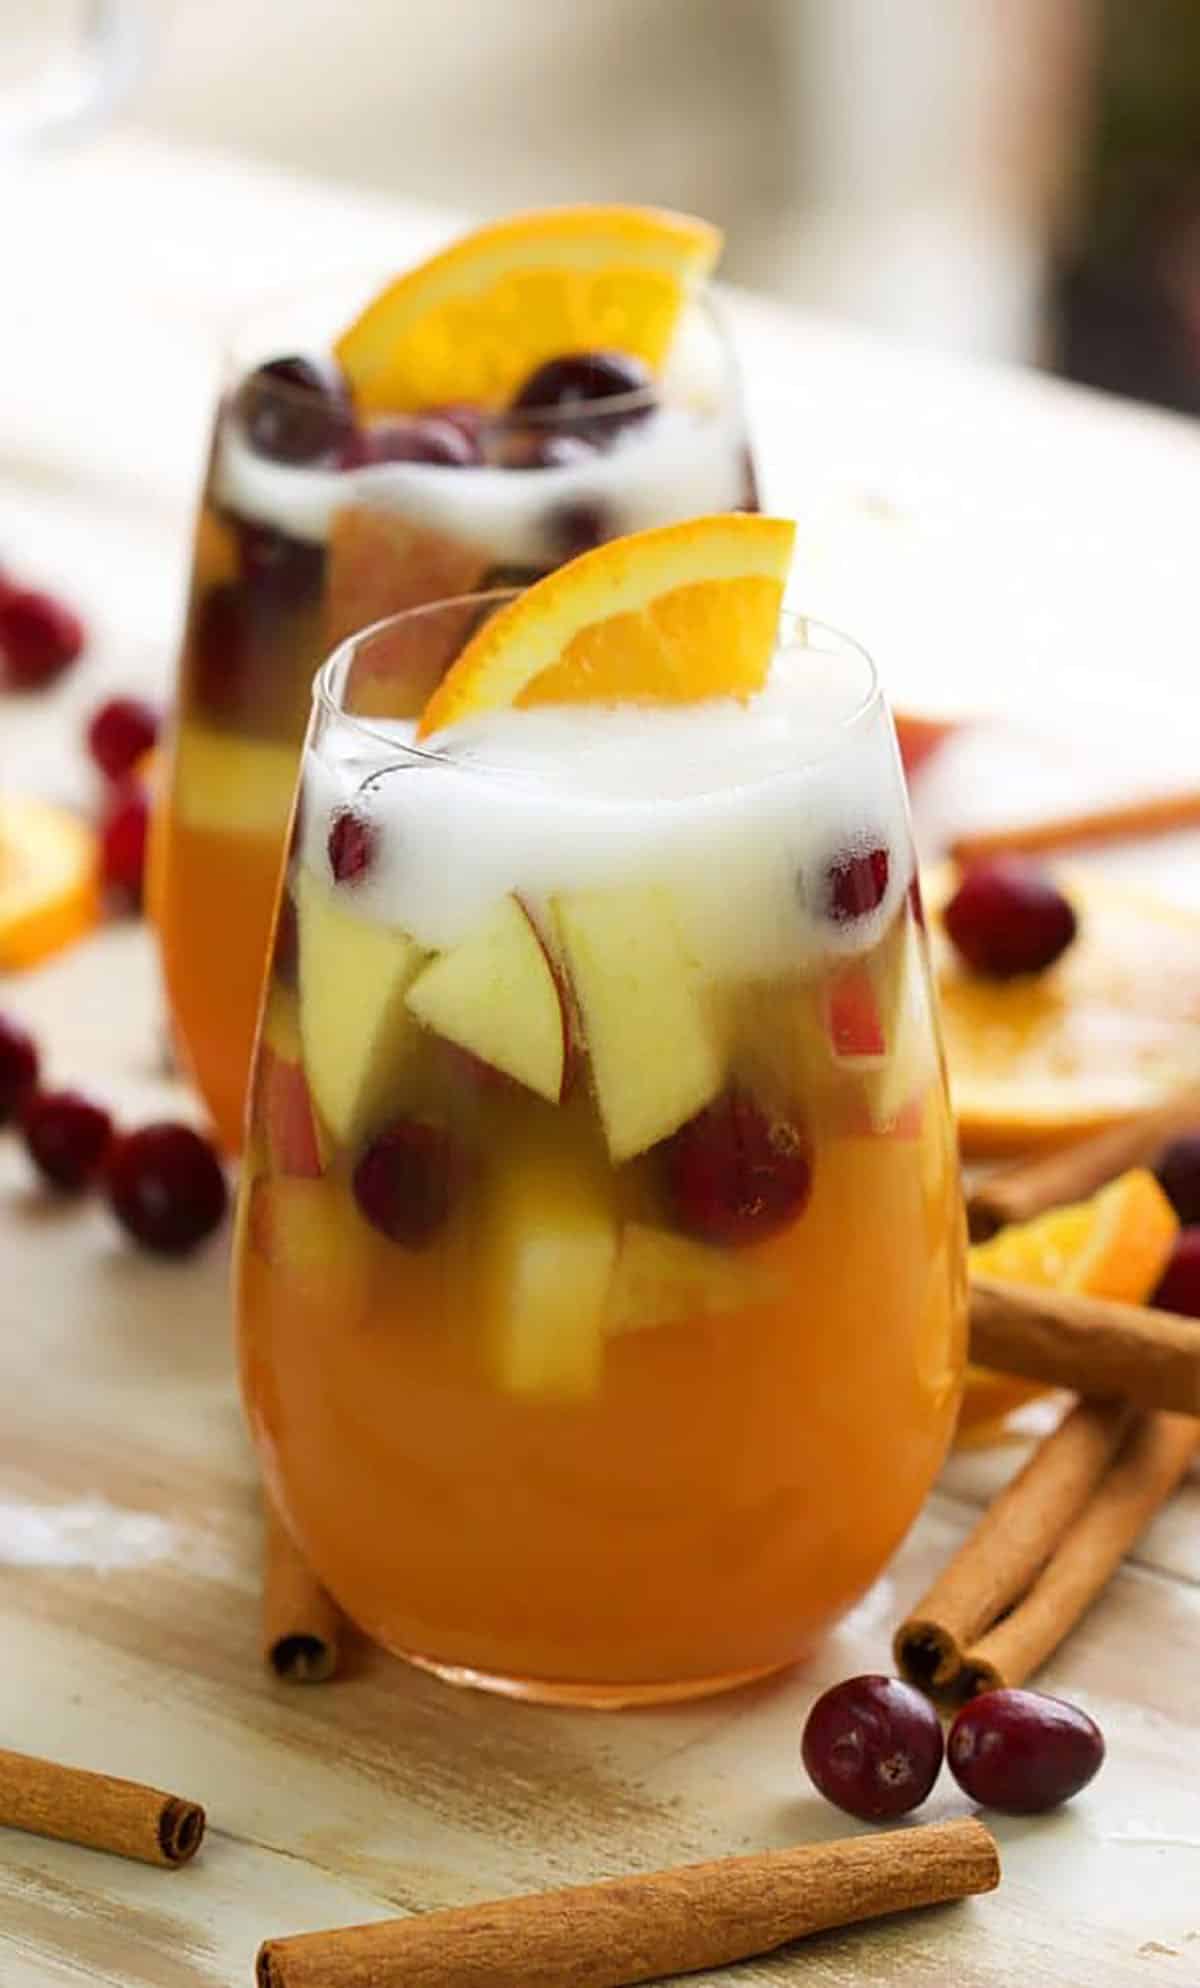 Apple Cider Sangria in a wine glass with foam on top from champagne.